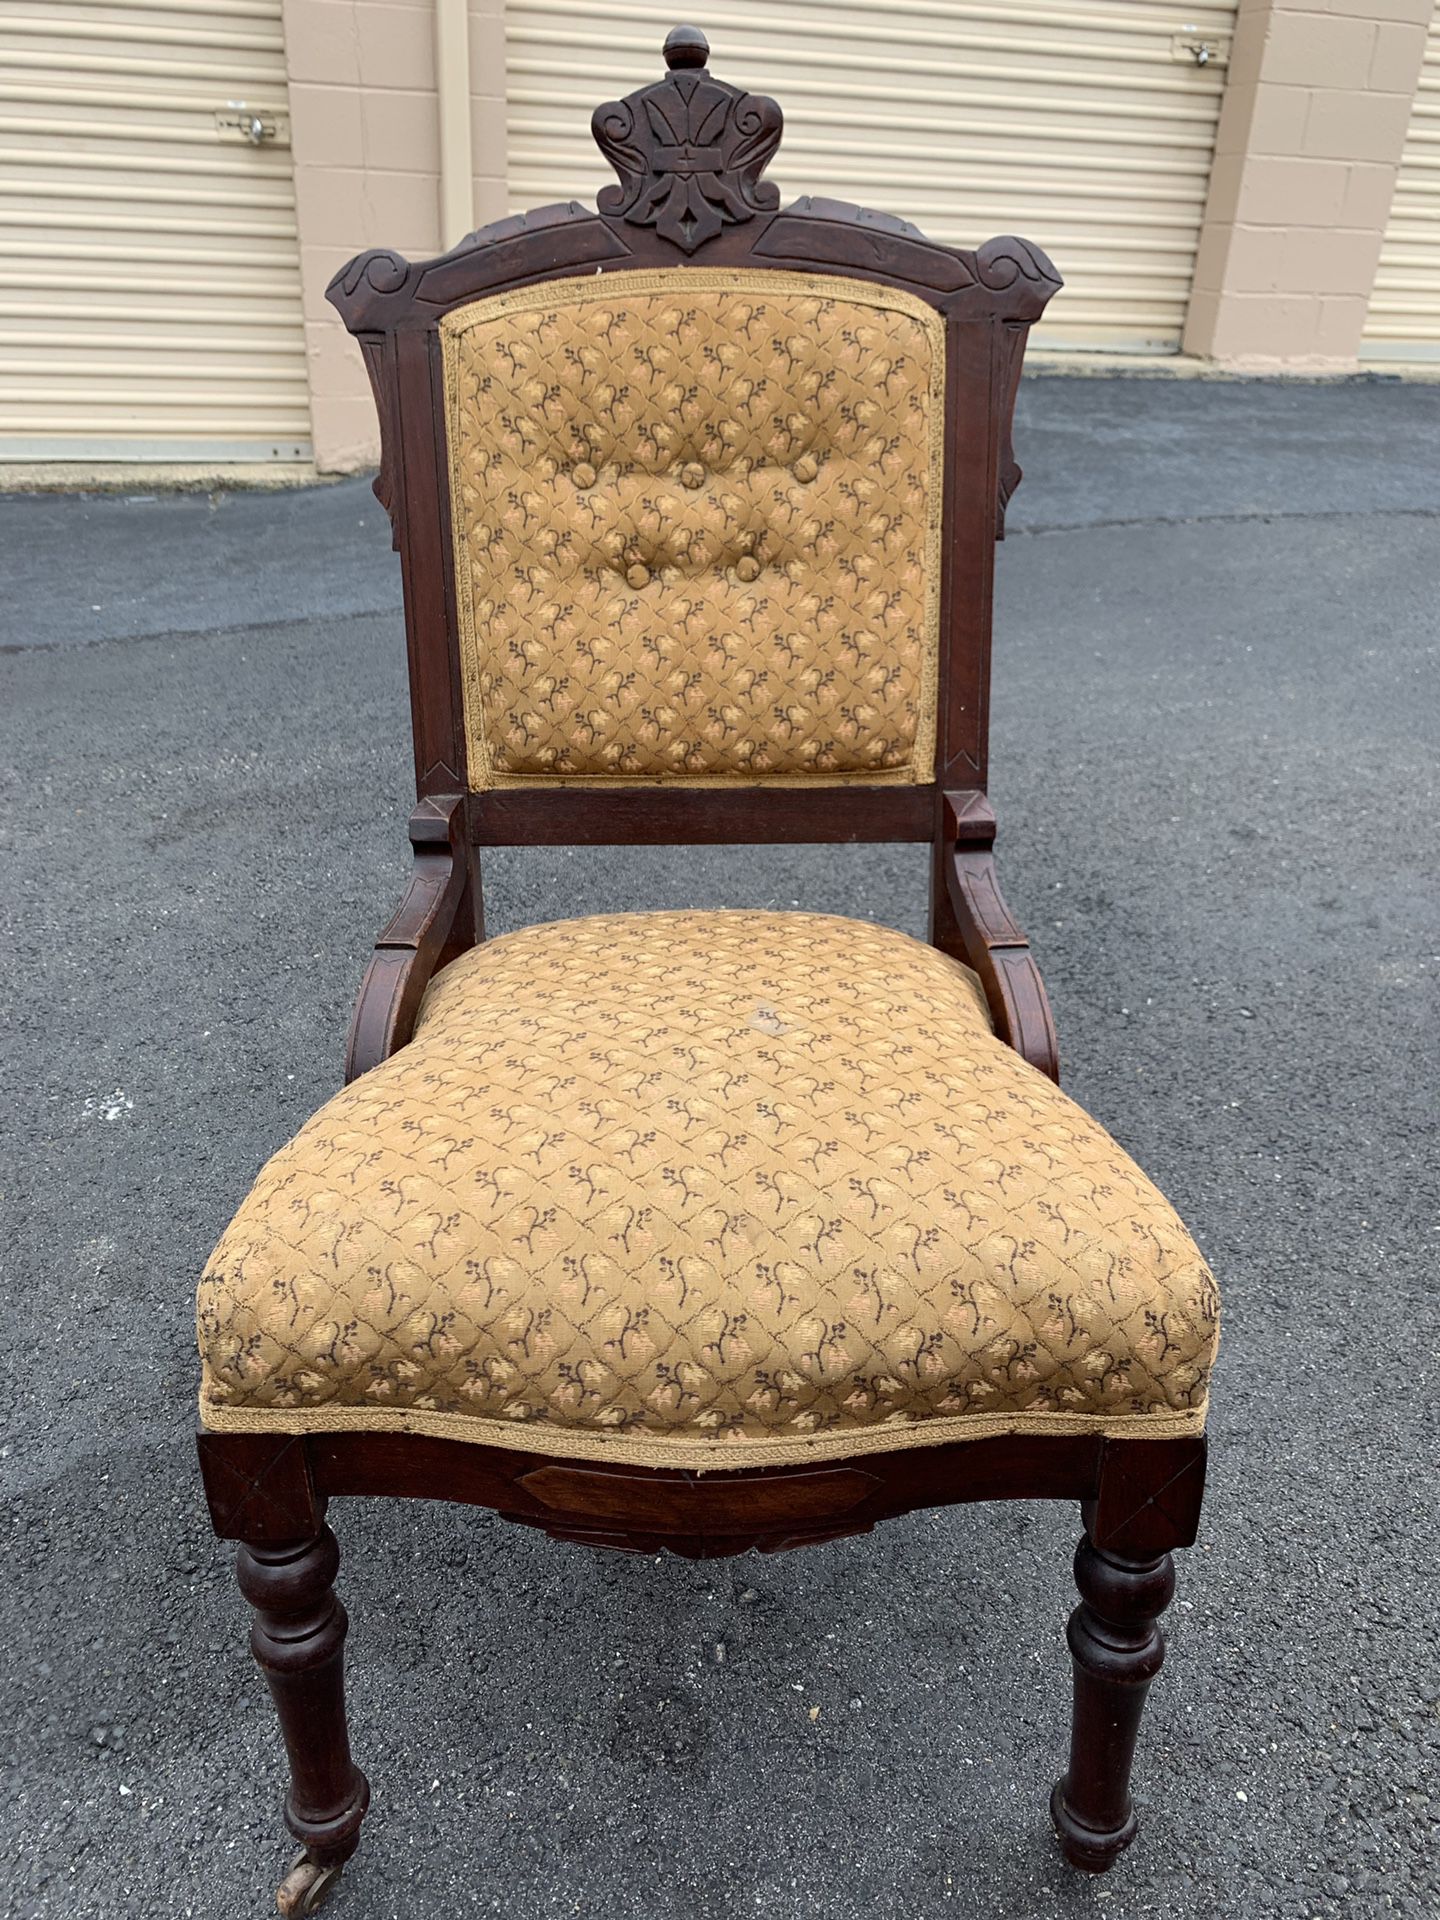 Antique rolling chair